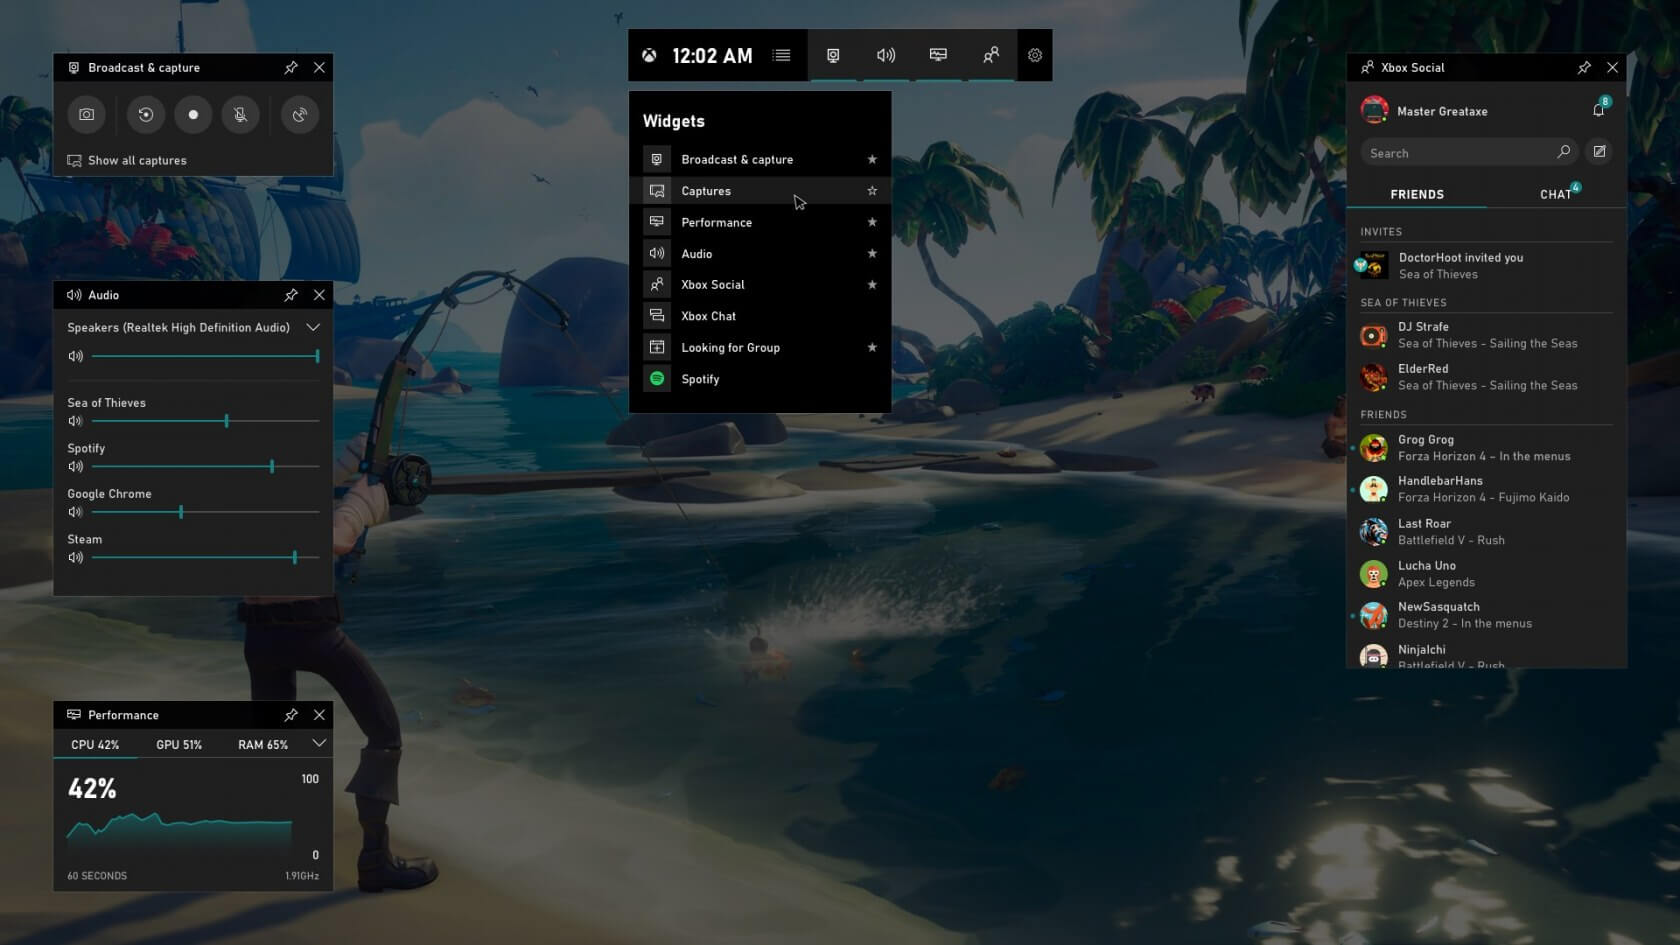 Windows 10 game bar gains a frame rate counter and achievement overlay